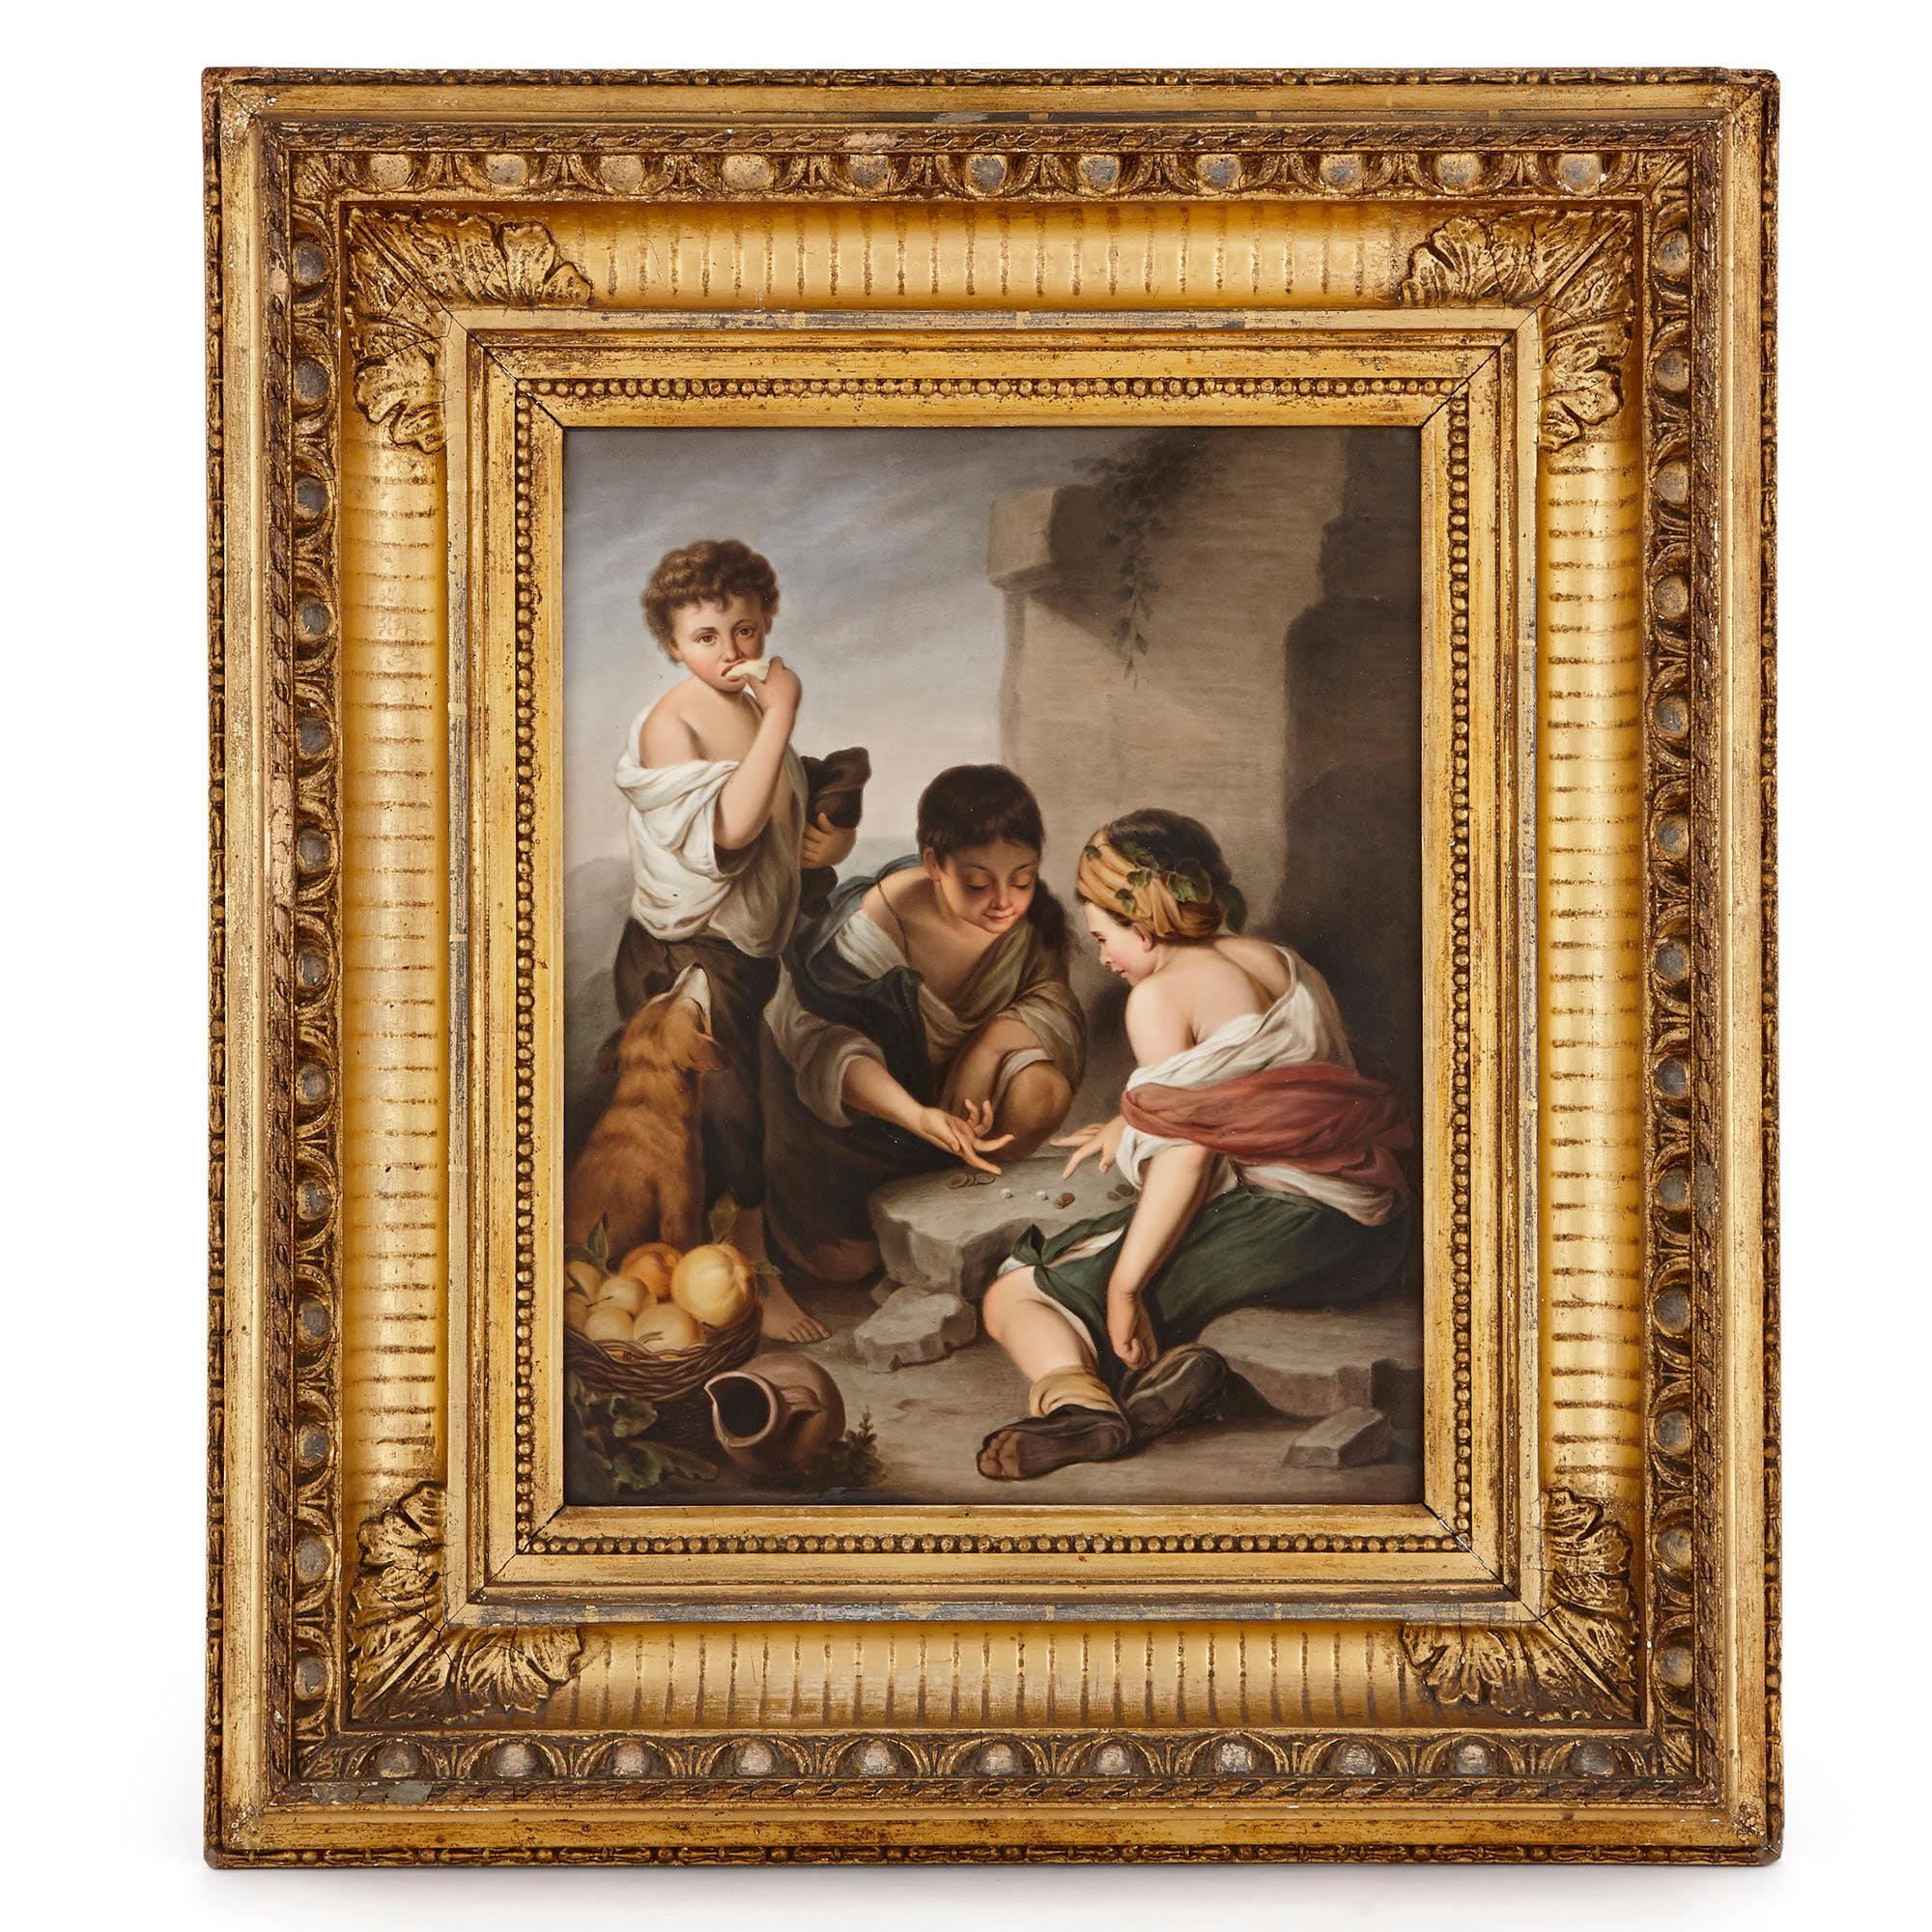 These wonderful porcelain plaques were created in circa 1860 by the prestigious Konigliche Porzellan Manufaktur or KPM (German, founded in 1763). The plaques feature beautiful paintings based on works by the famous Seville-based Baroque artist,